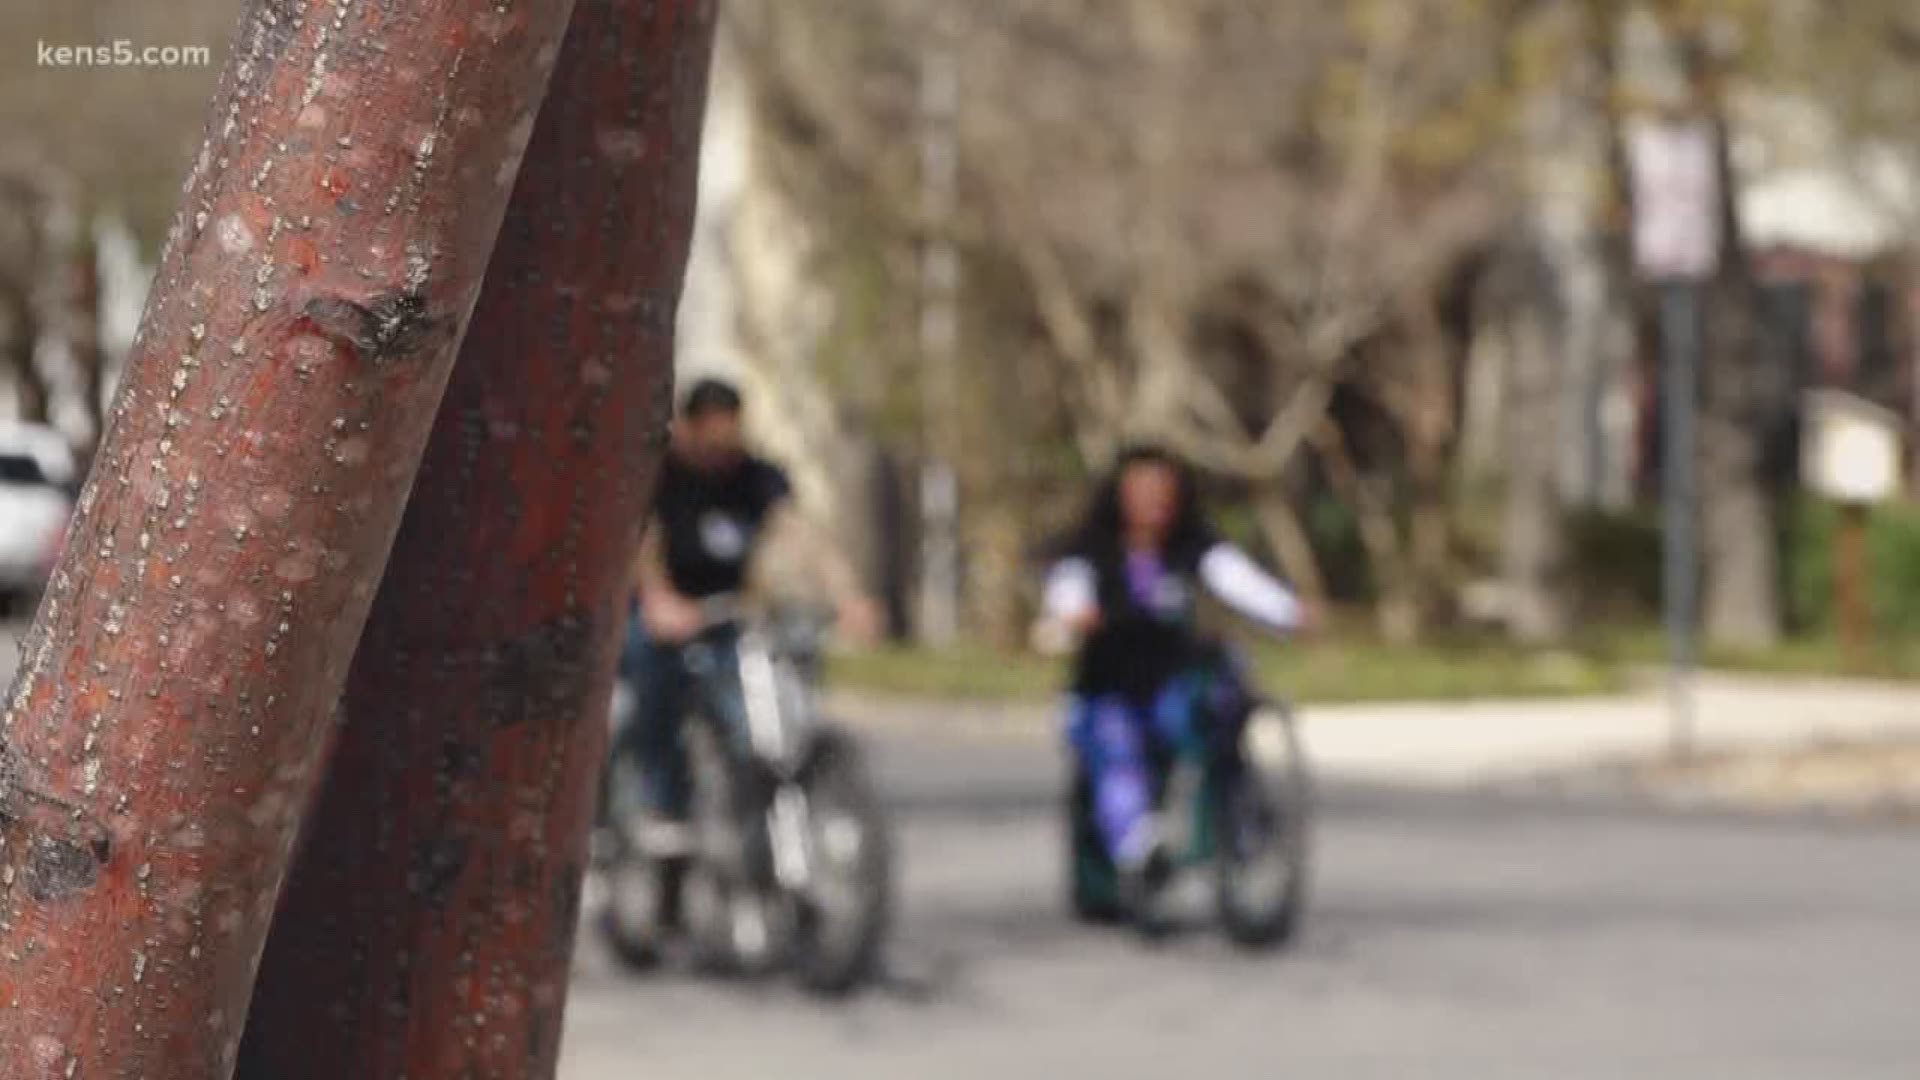 After a 10-year-old girl was fatally struck by a car while biking to school, this San Antonian hopes to provide other children with free helmets.